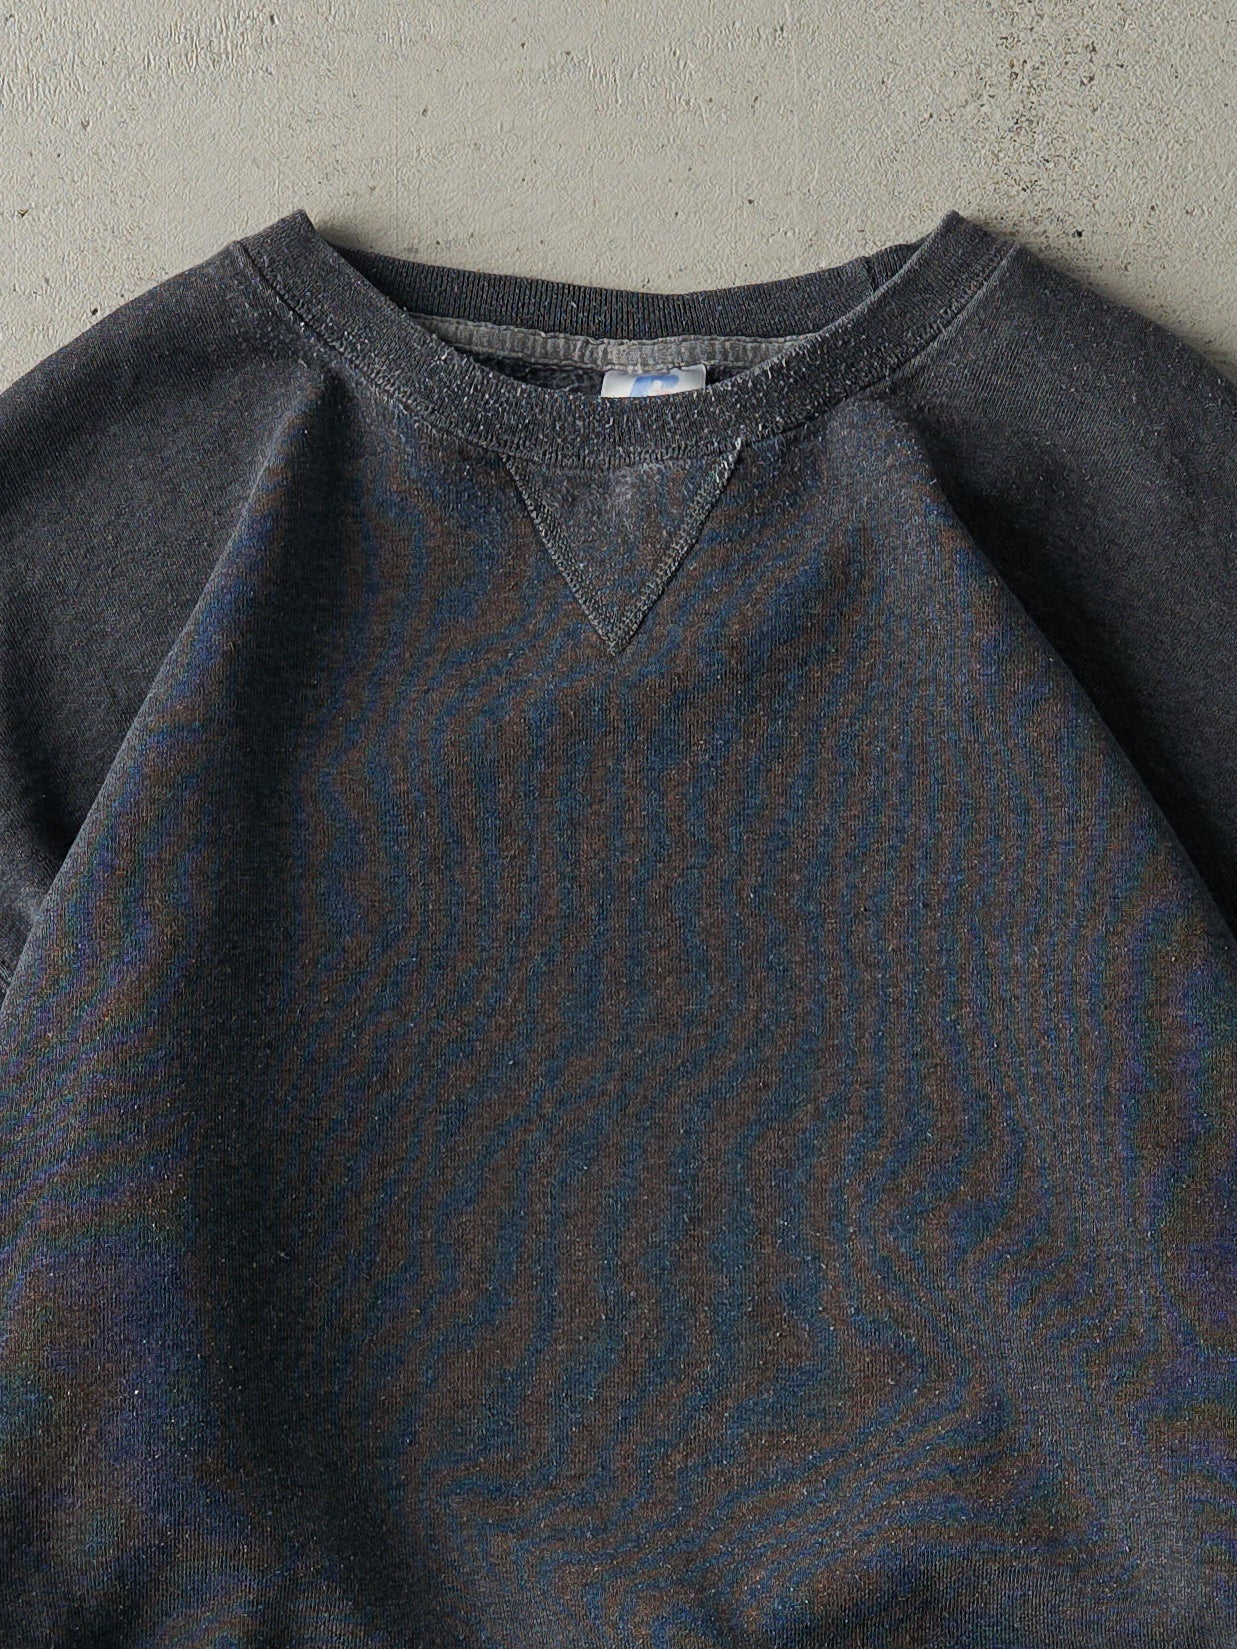 Vintage Y2K Charcoal Grey Blank Russell Athletic Boxy Crewneck (L)